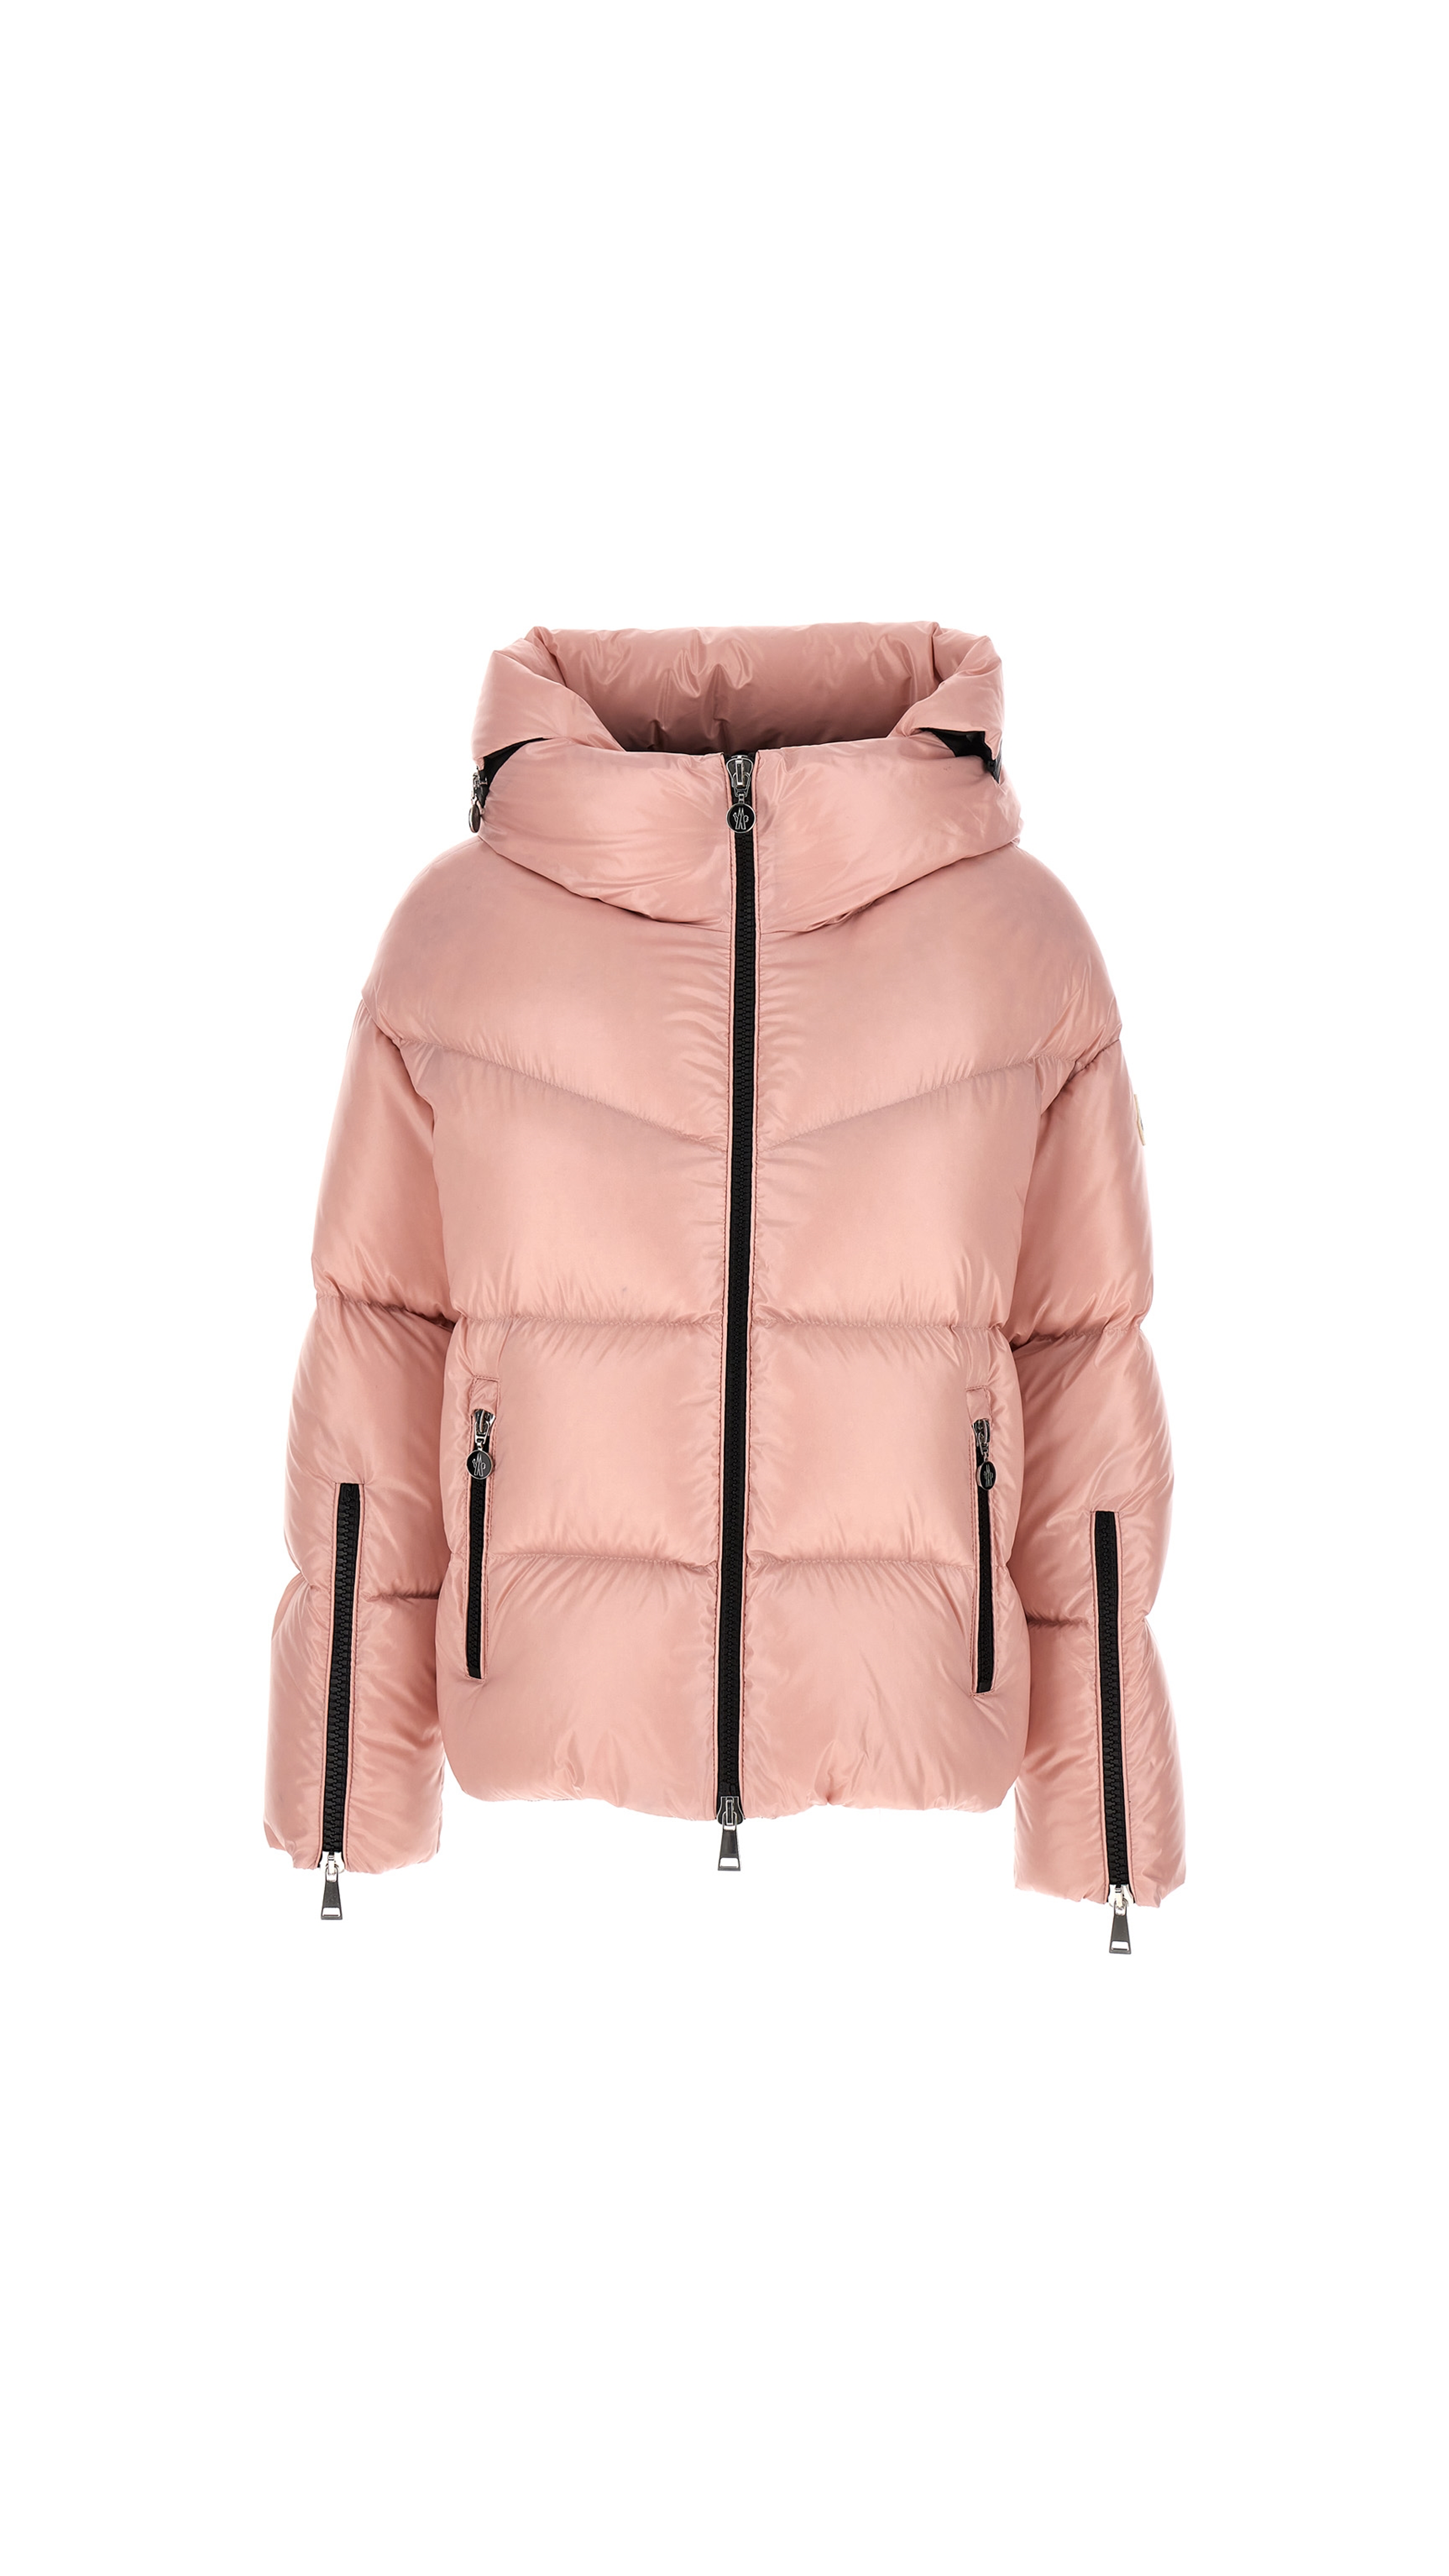 'Huppe' Down Jacket - Pink